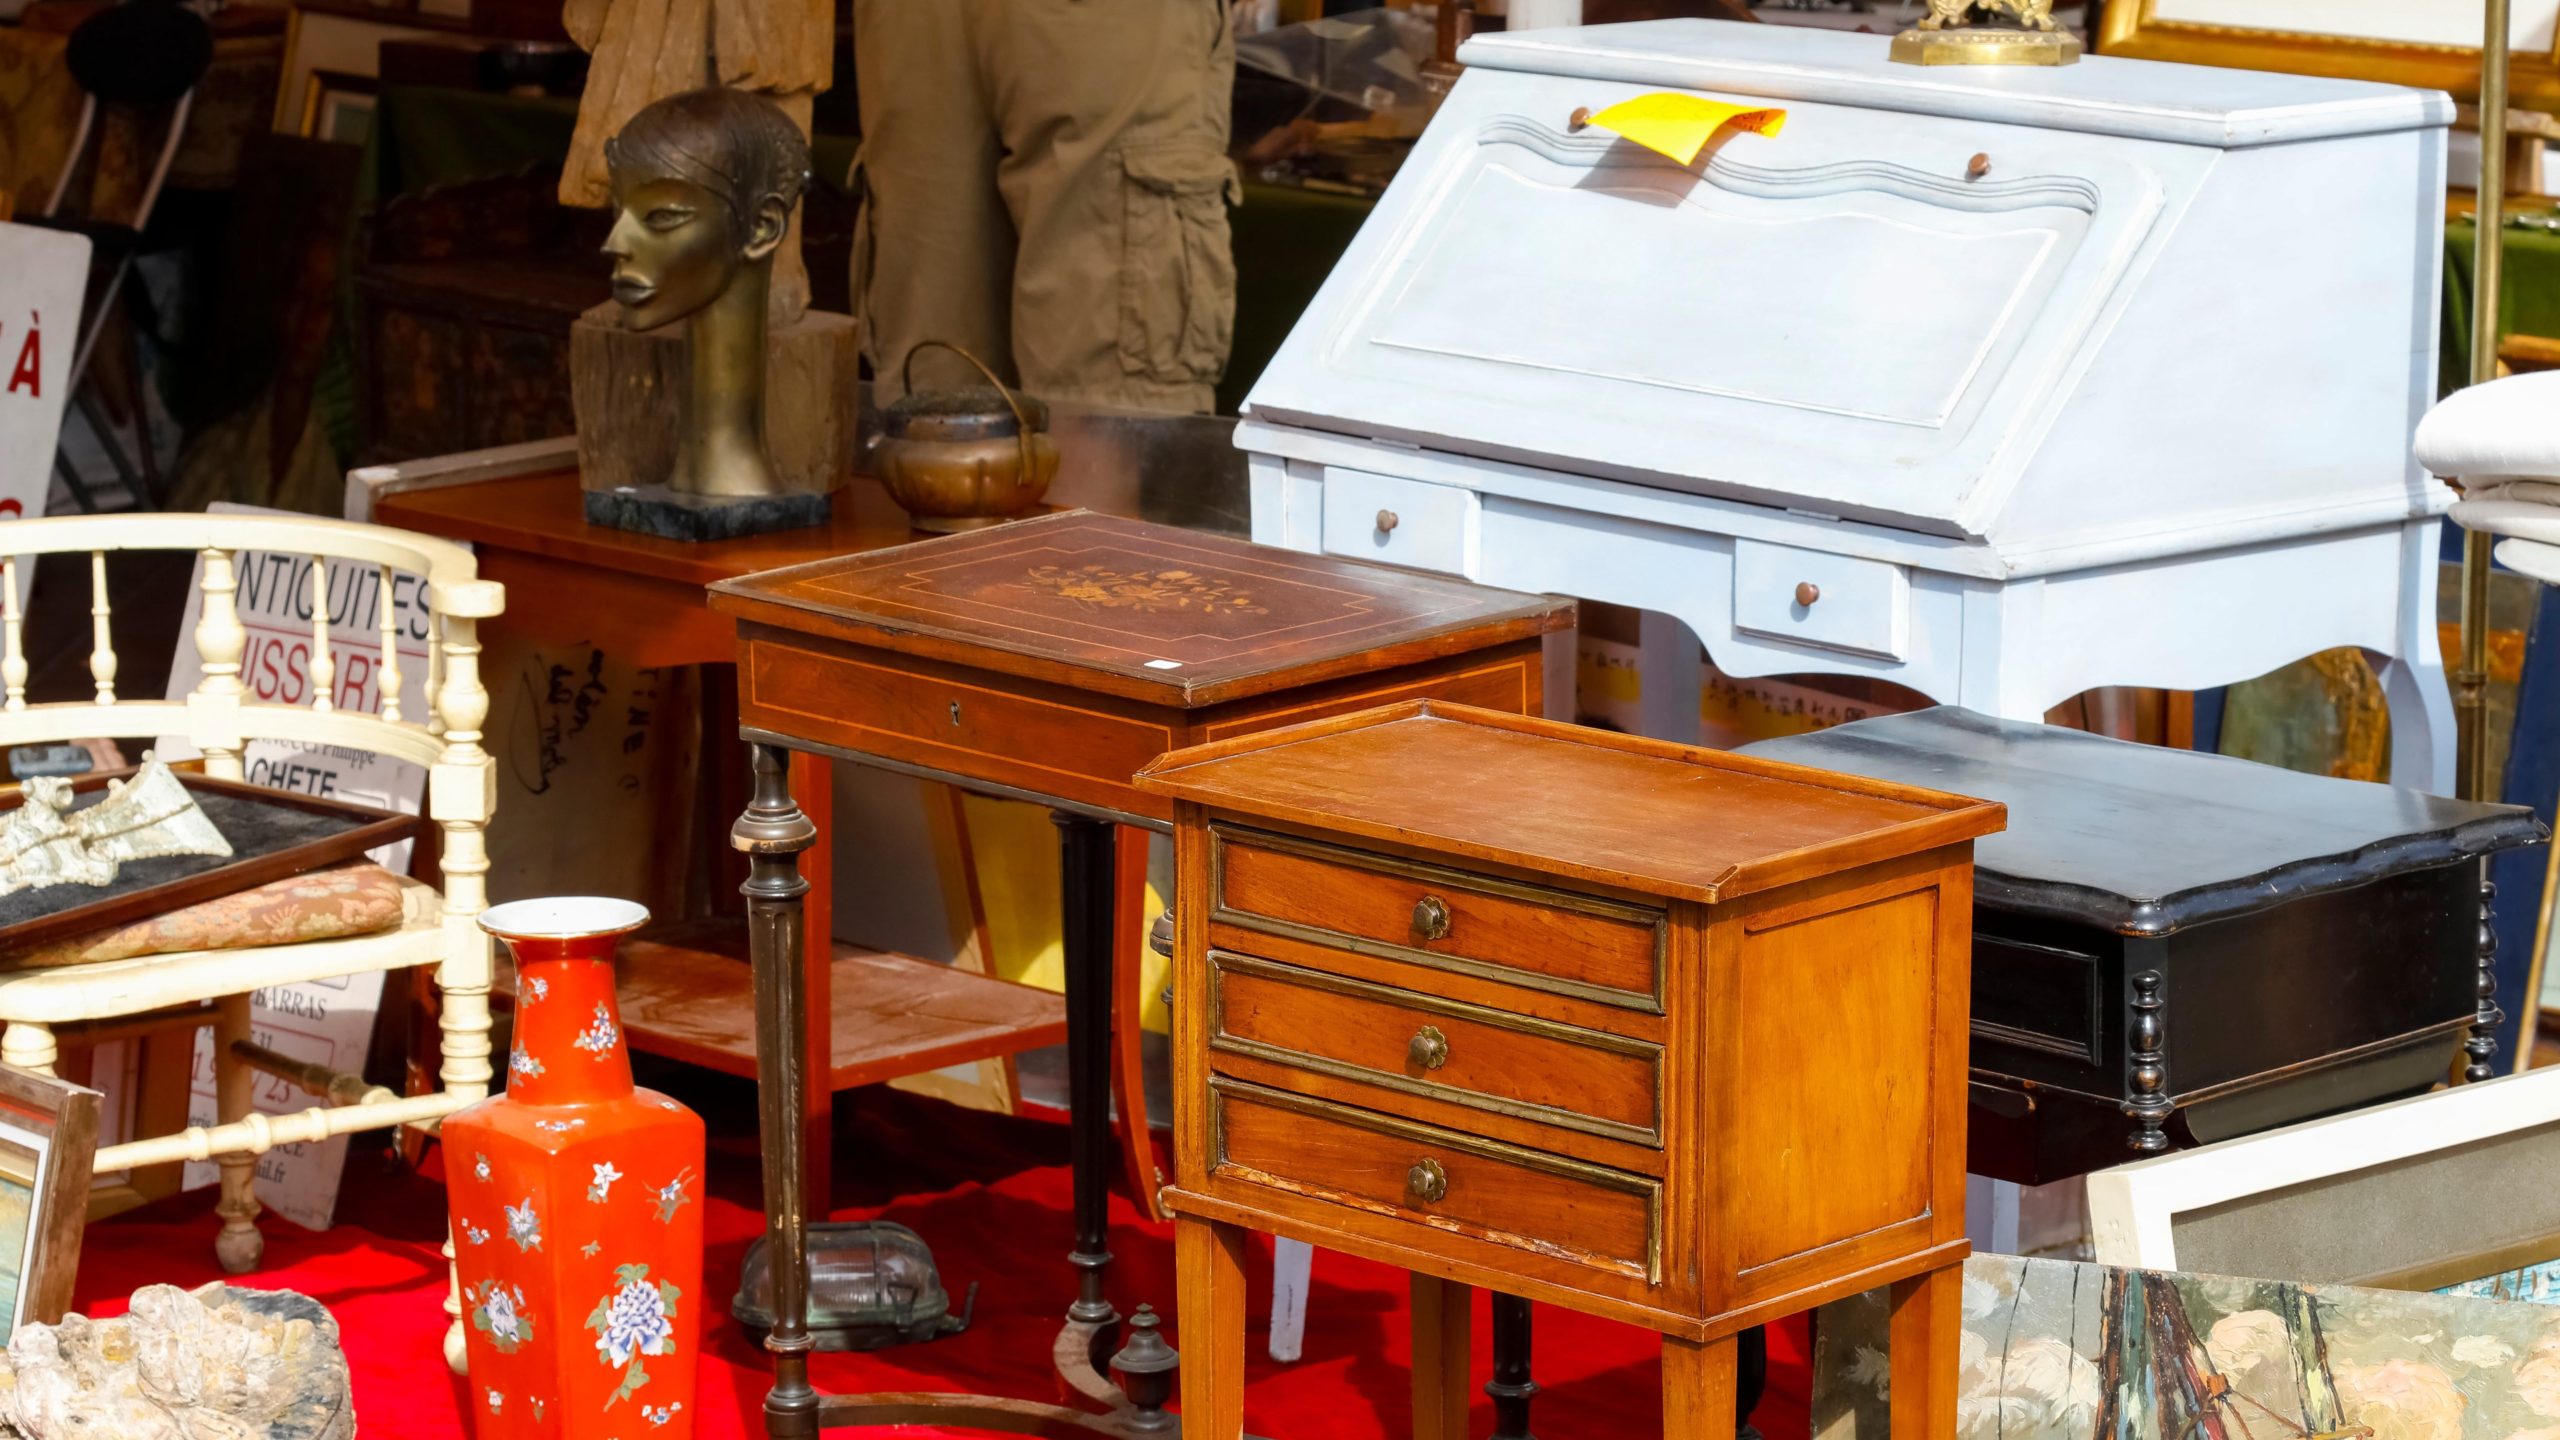 How to Rid Your Secondhand Furniture of That Thrift Store Smell